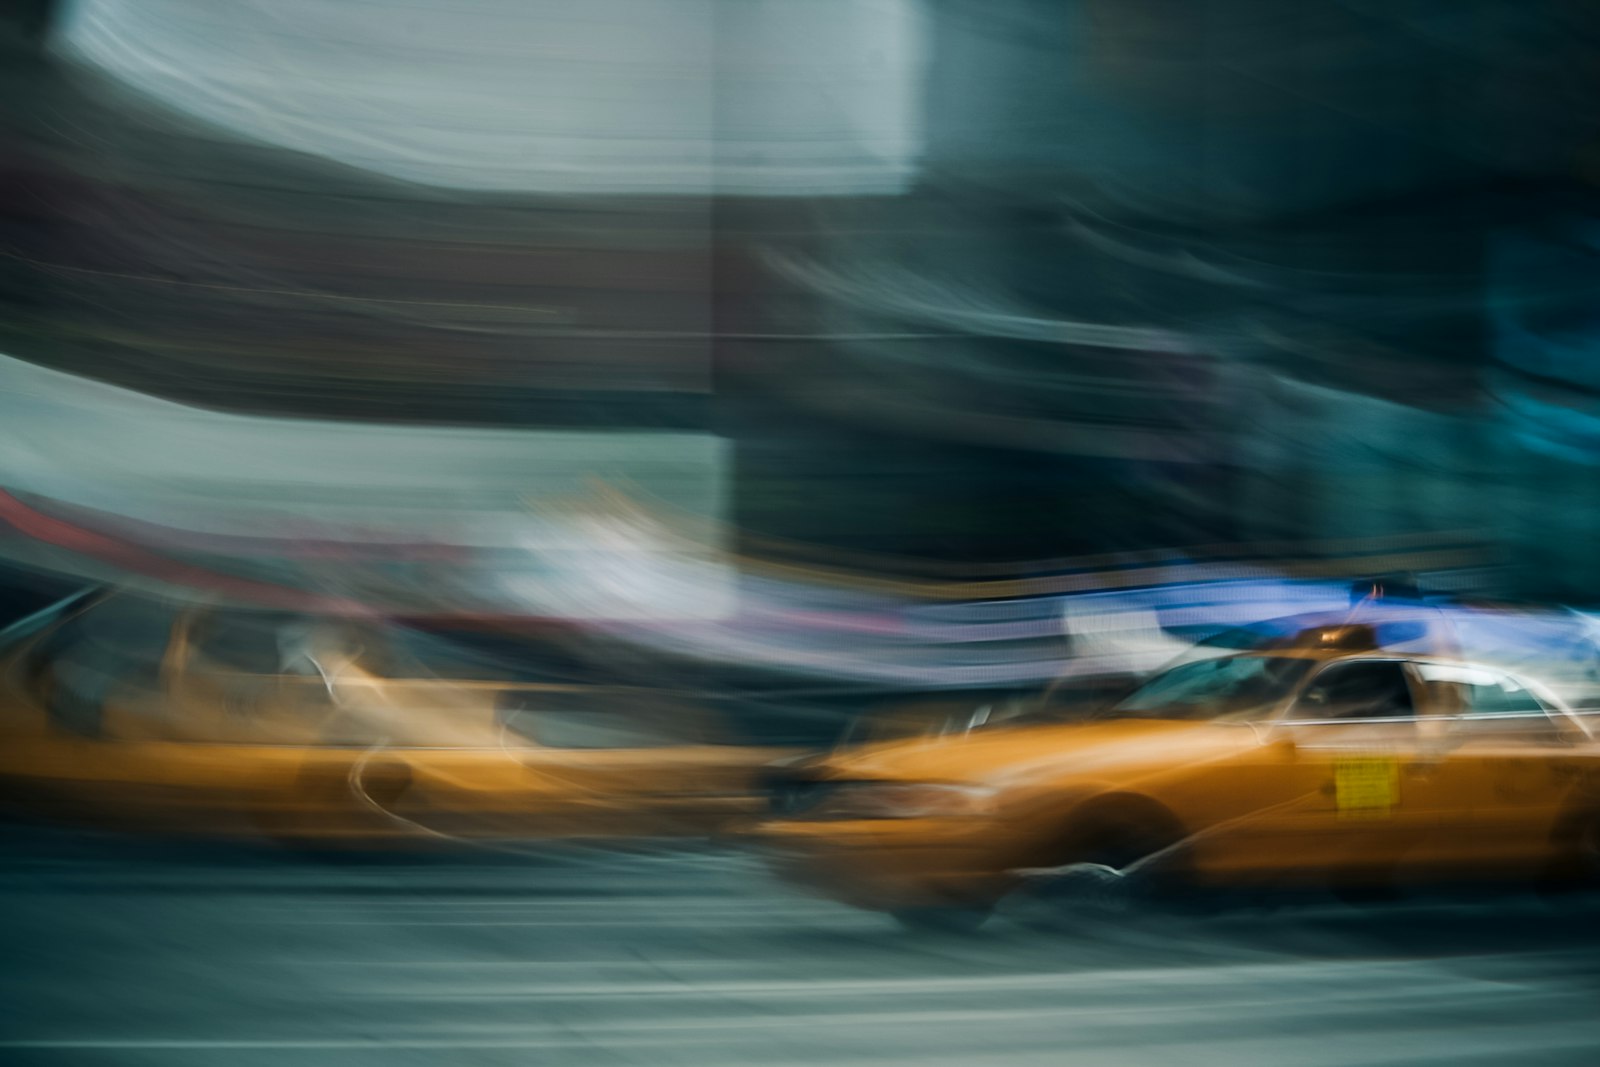 Canon EOS D30 sample photo. Yellow taxi cab on photography